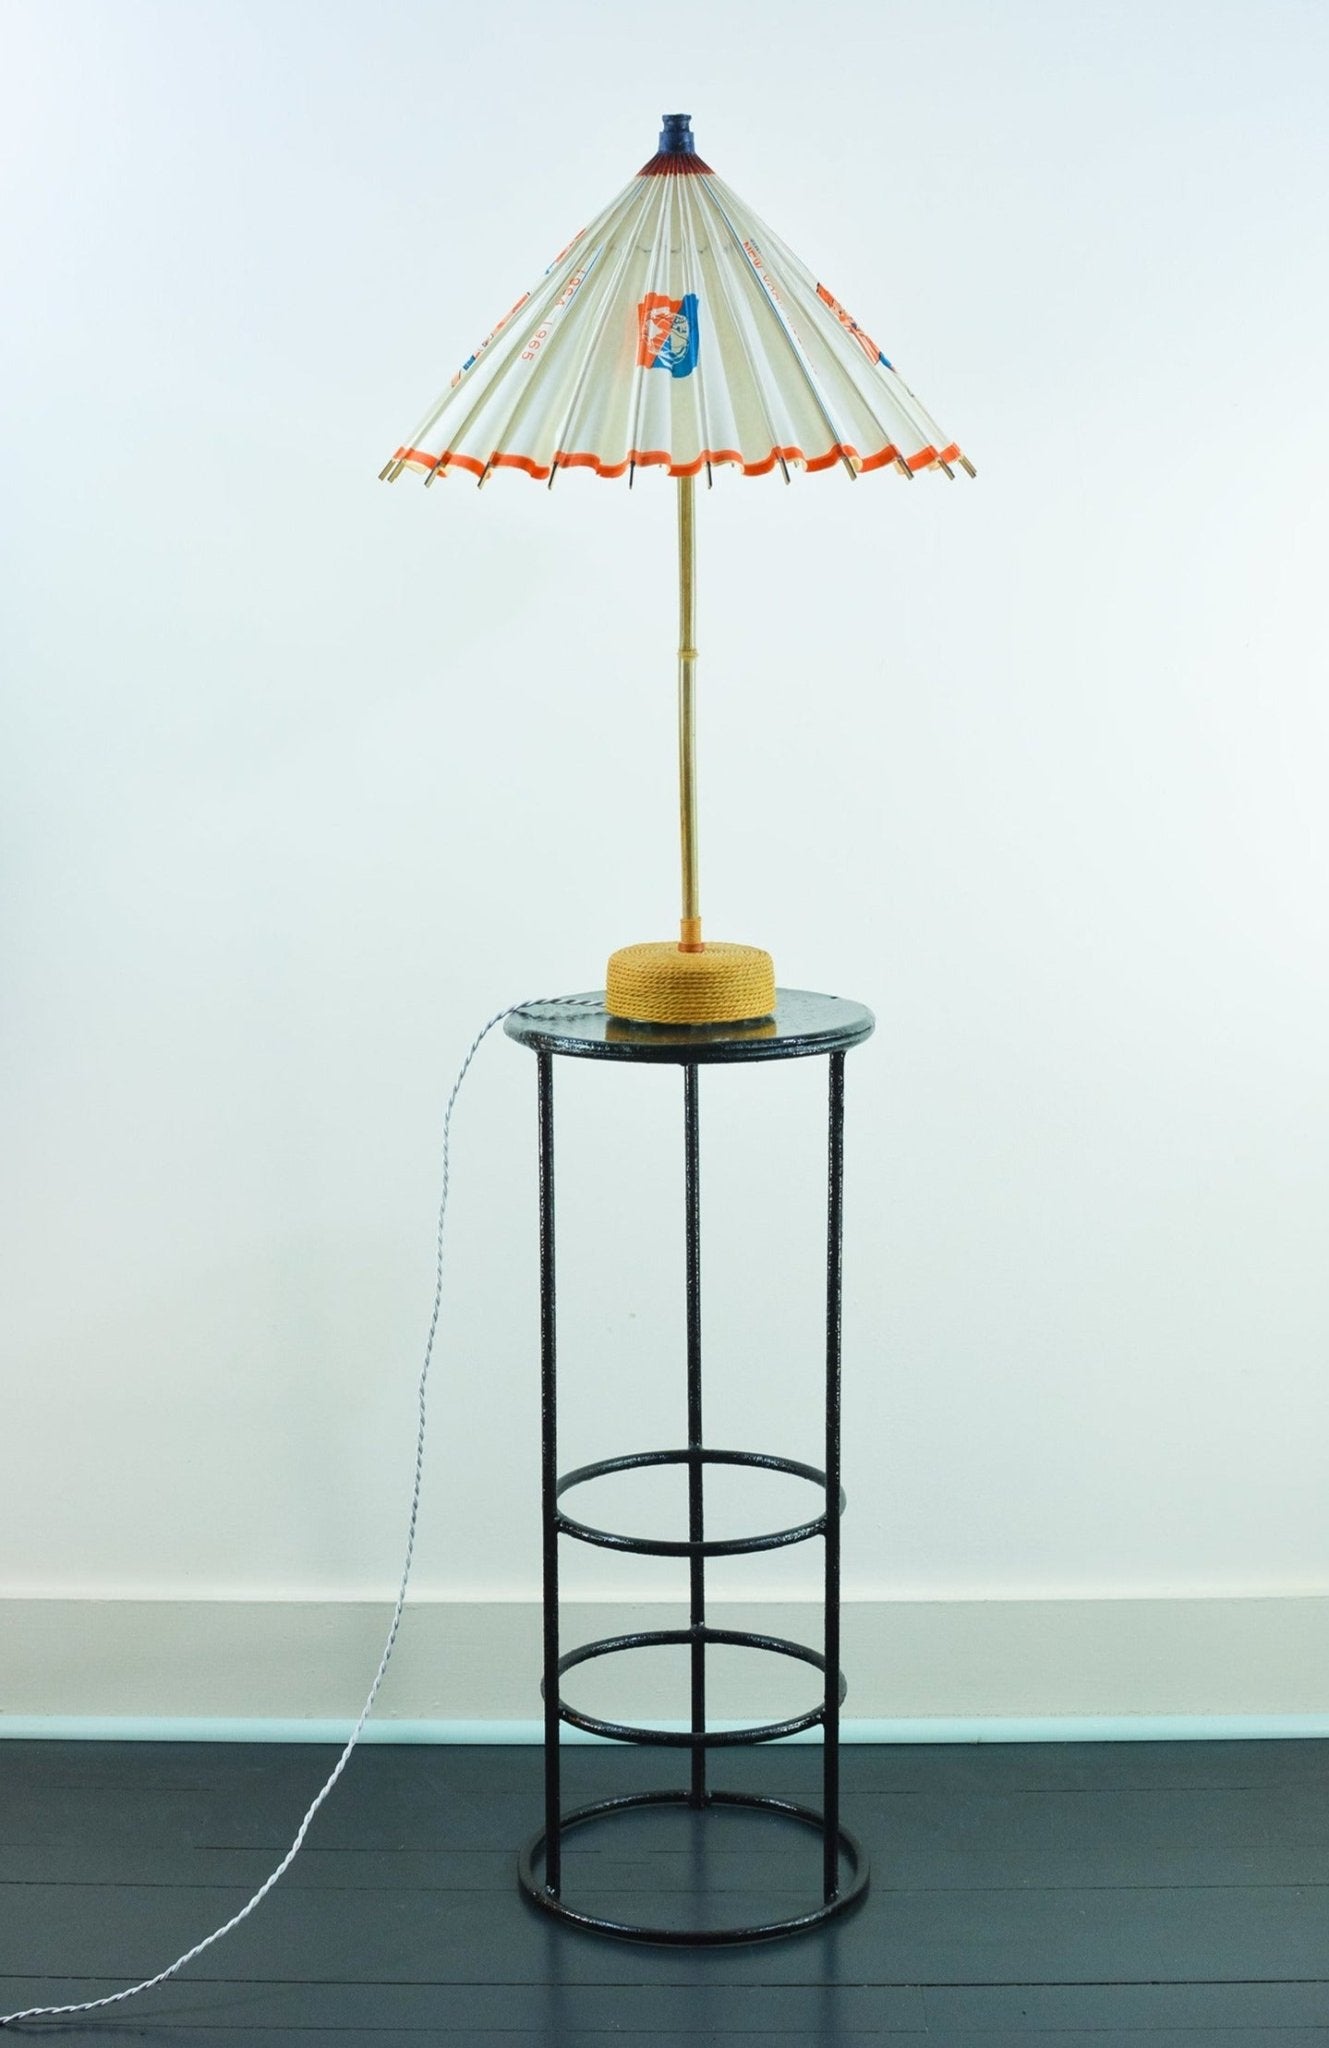 1964 New York 'World's Fair' Bamboo Table Lamp with Parasol Shade and Coiled Seagrass Base — Model No. 005 - Tennant New York